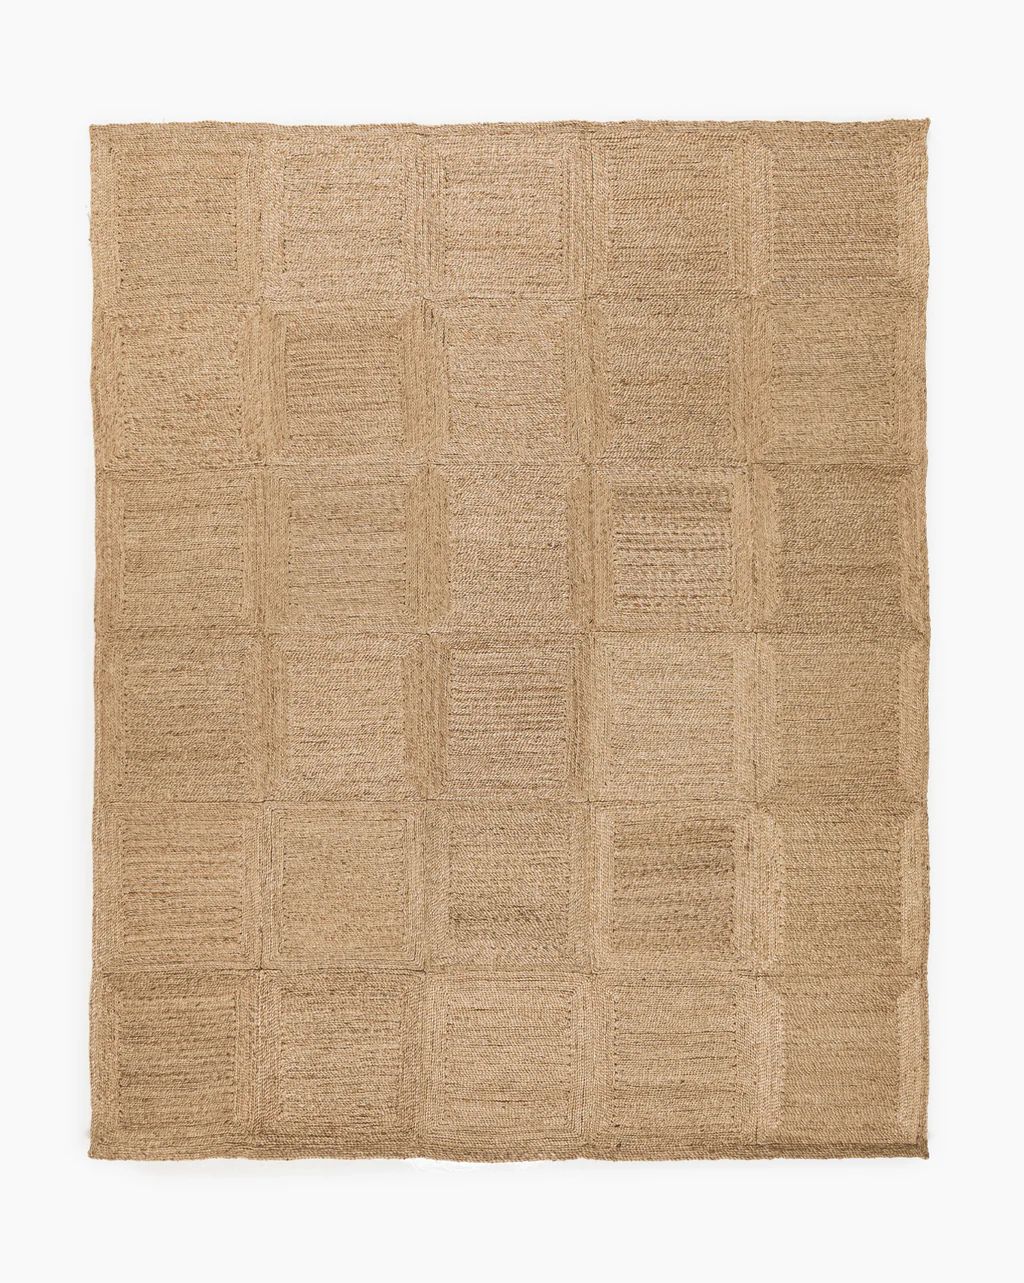 Pieced Handwoven Jute Rug | McGee & Co. (US)